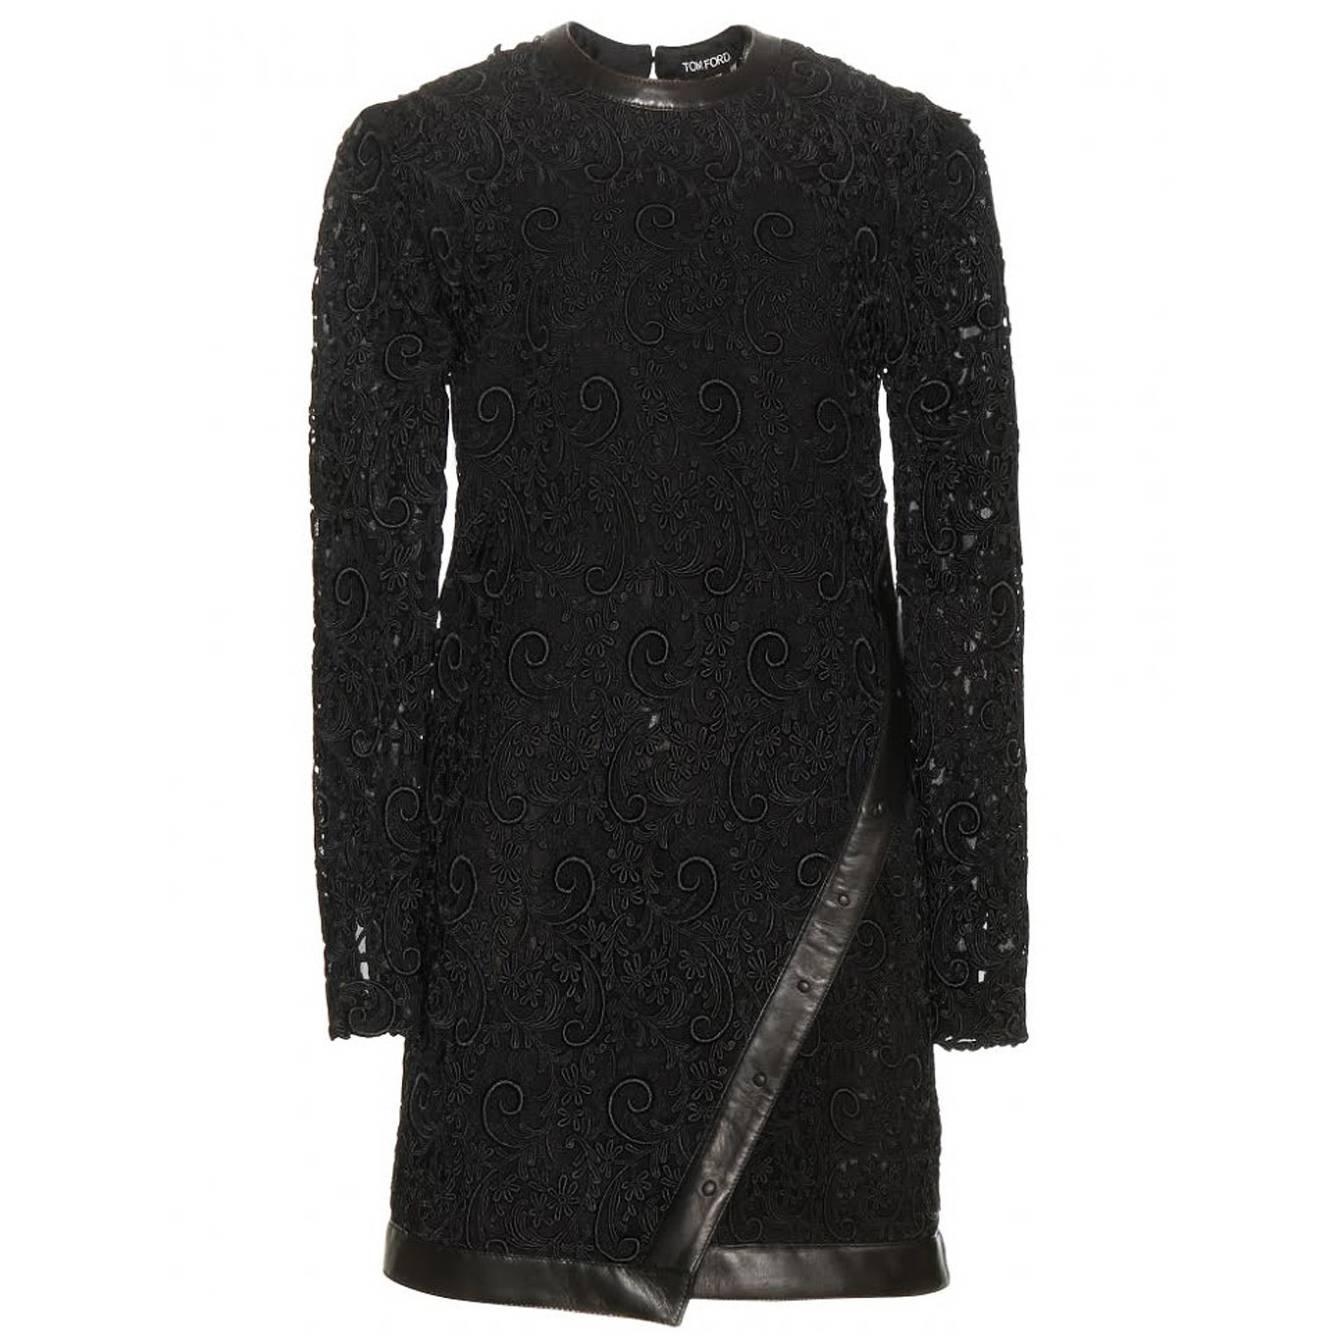 New Tom Ford Leather-Trimmed Guipure Lace Mini Black Dress 36 - US 6 For Sale